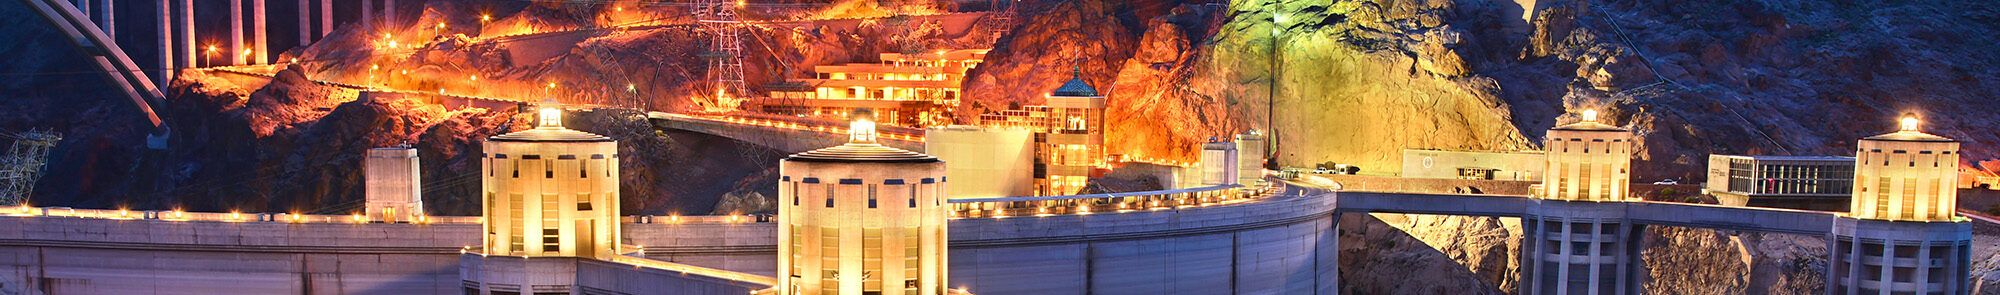 hoover dam at night banner